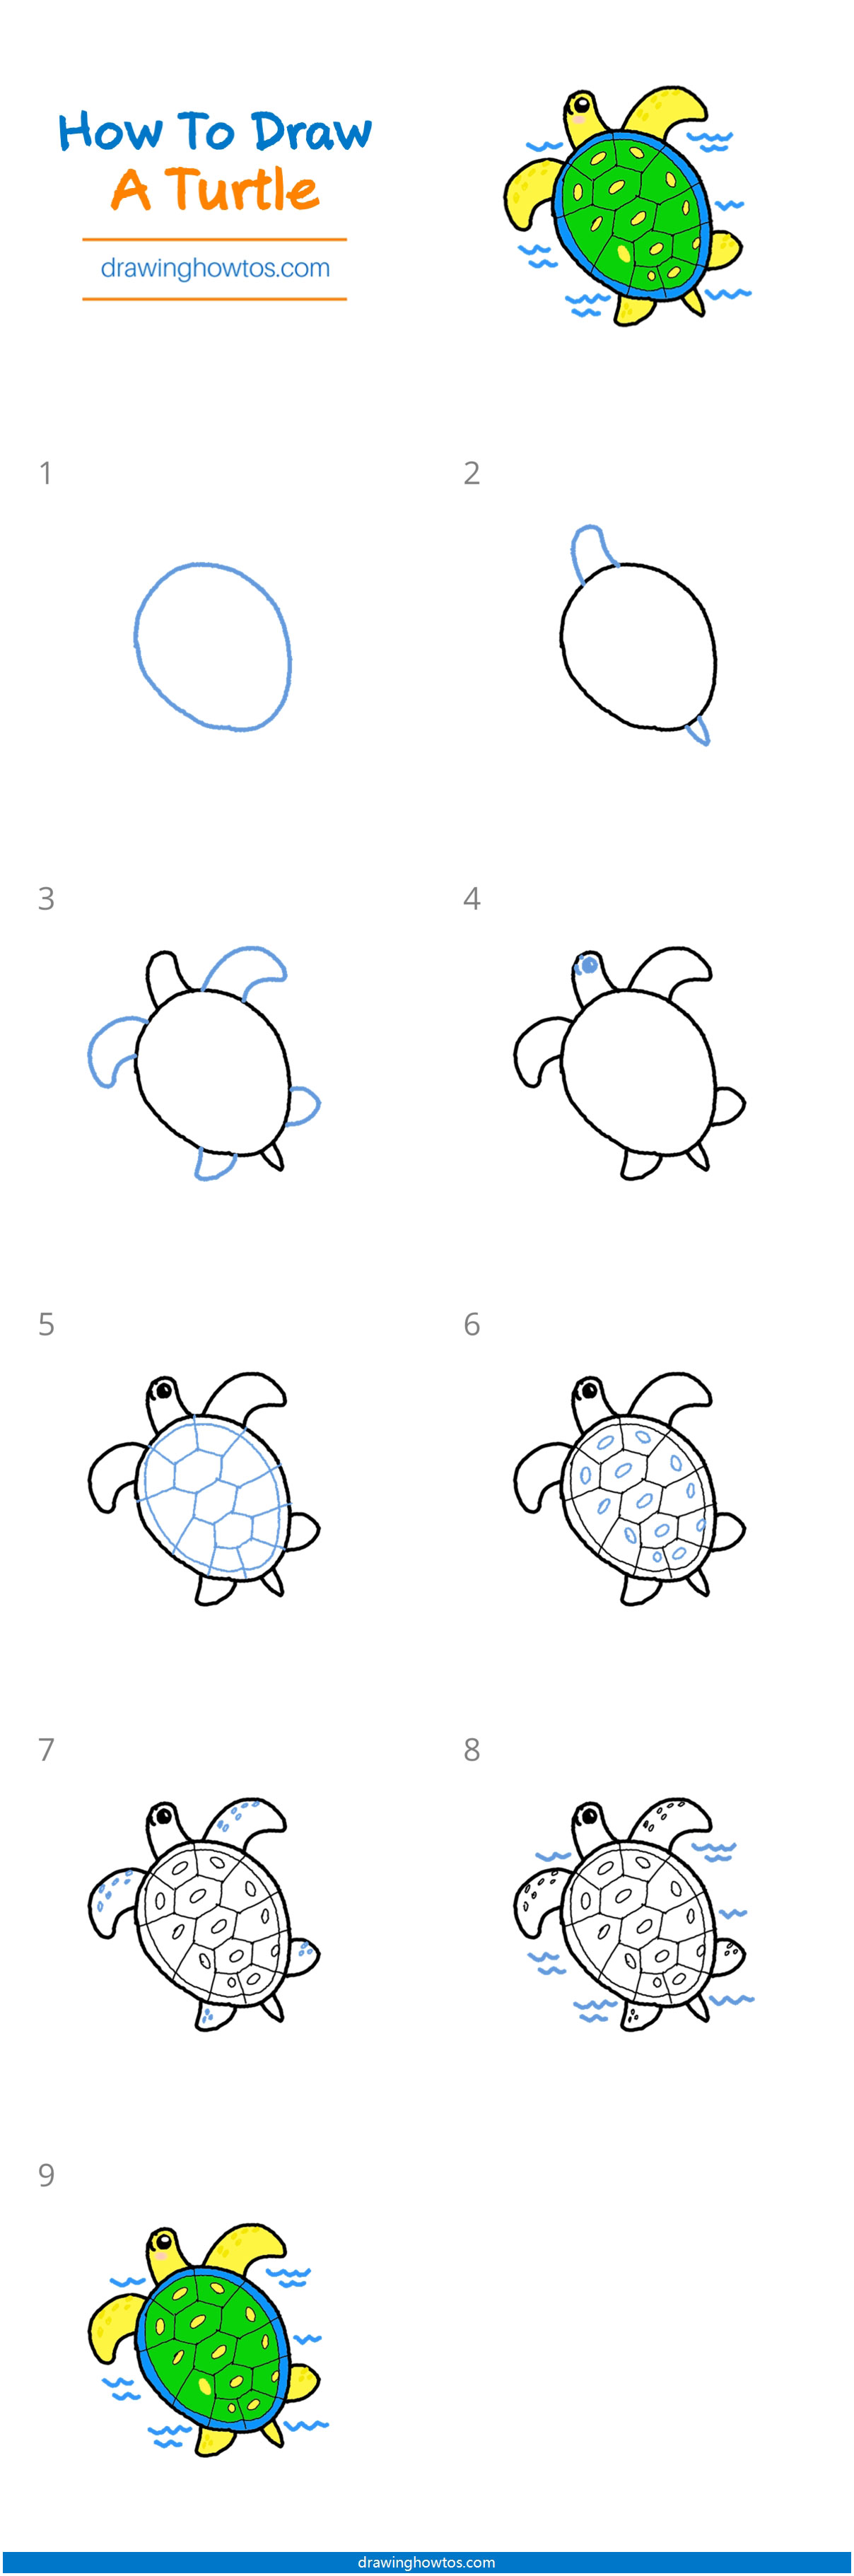 How to Draw a Turtle - Step by Step Easy Drawing Guides ...